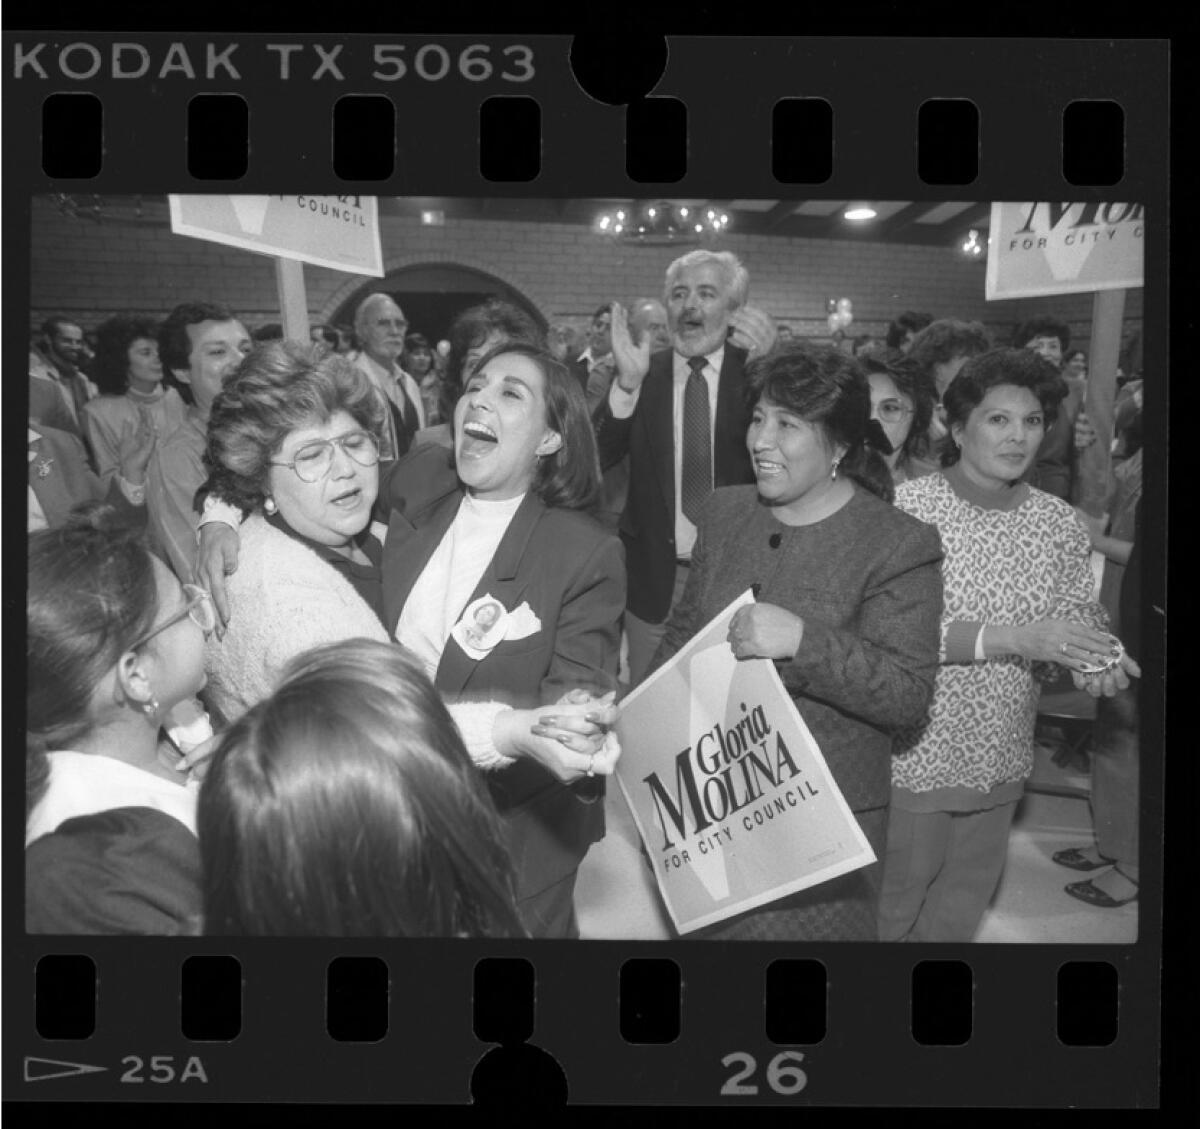 Gloria Molina is surrounded by her mother and supporters as she celebrates her City Council victory in 1987.